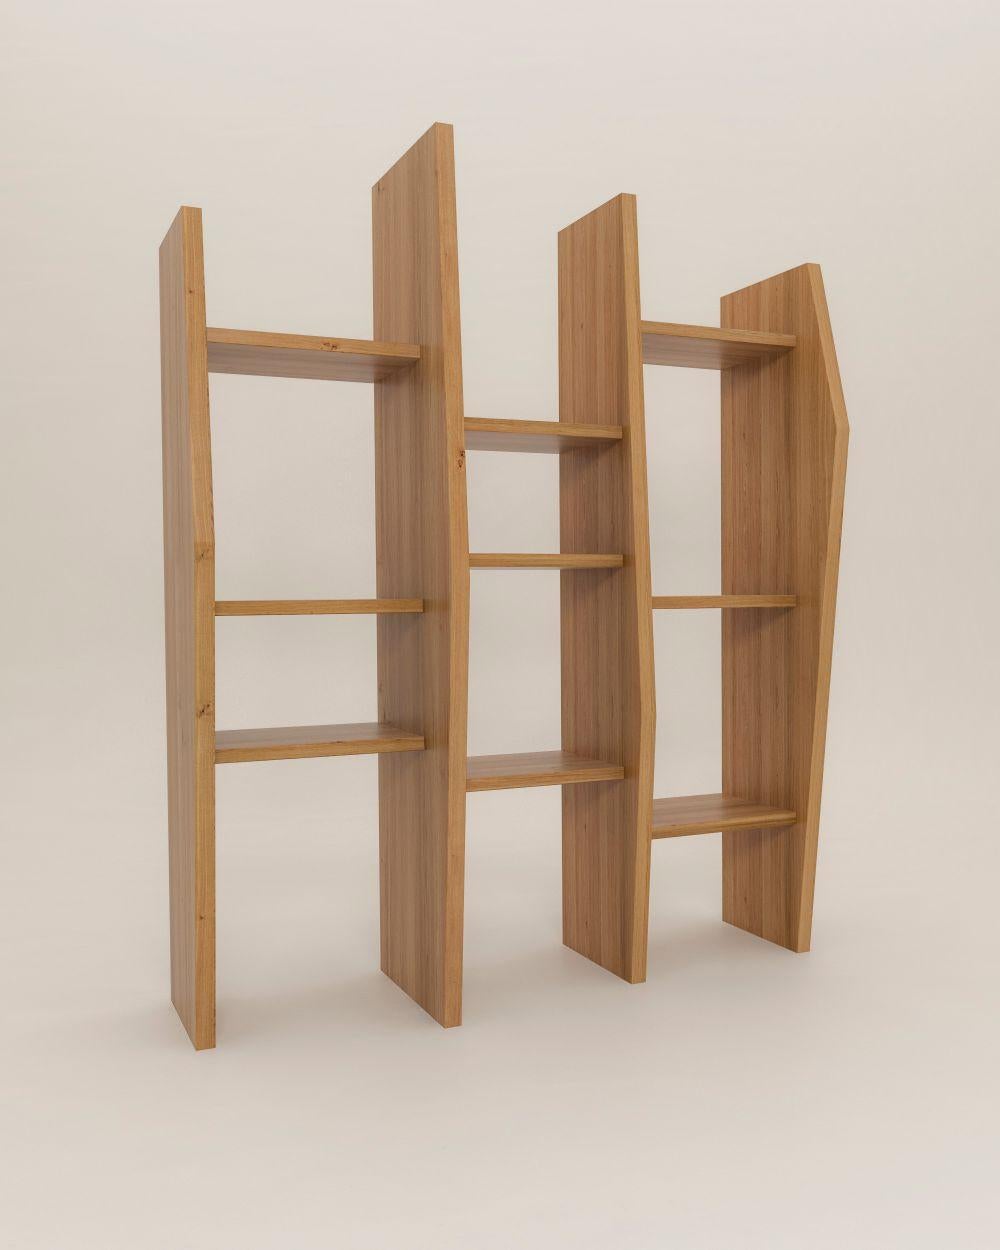 Crooked shelf by Nazara Lazaro
Dimensions: H 190 cm x W 155 cm x D 51 cm
Materials: Massive oak with oil wax surface

Also available in natural massive oak, walnut, and white lacquered wood.

The Crooked collection is an ongoing series of